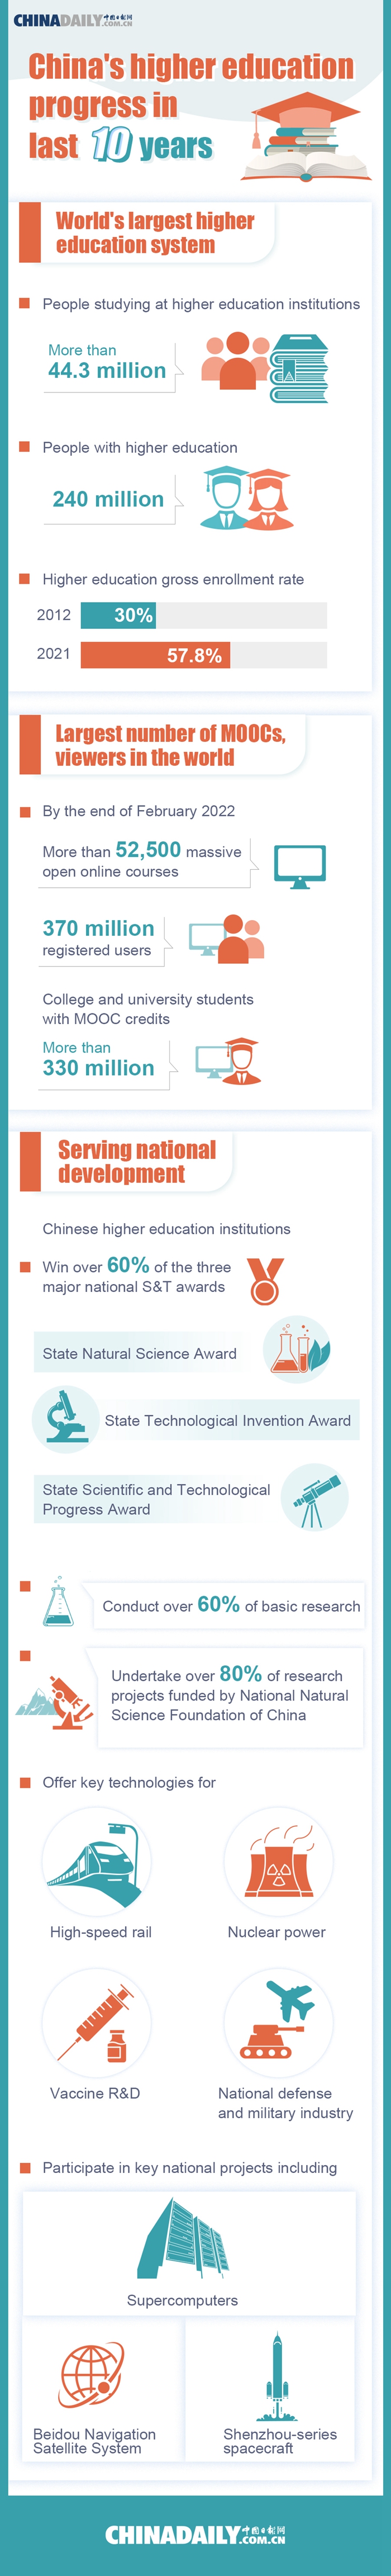 China's Higher Education Progress in Last 10 Years